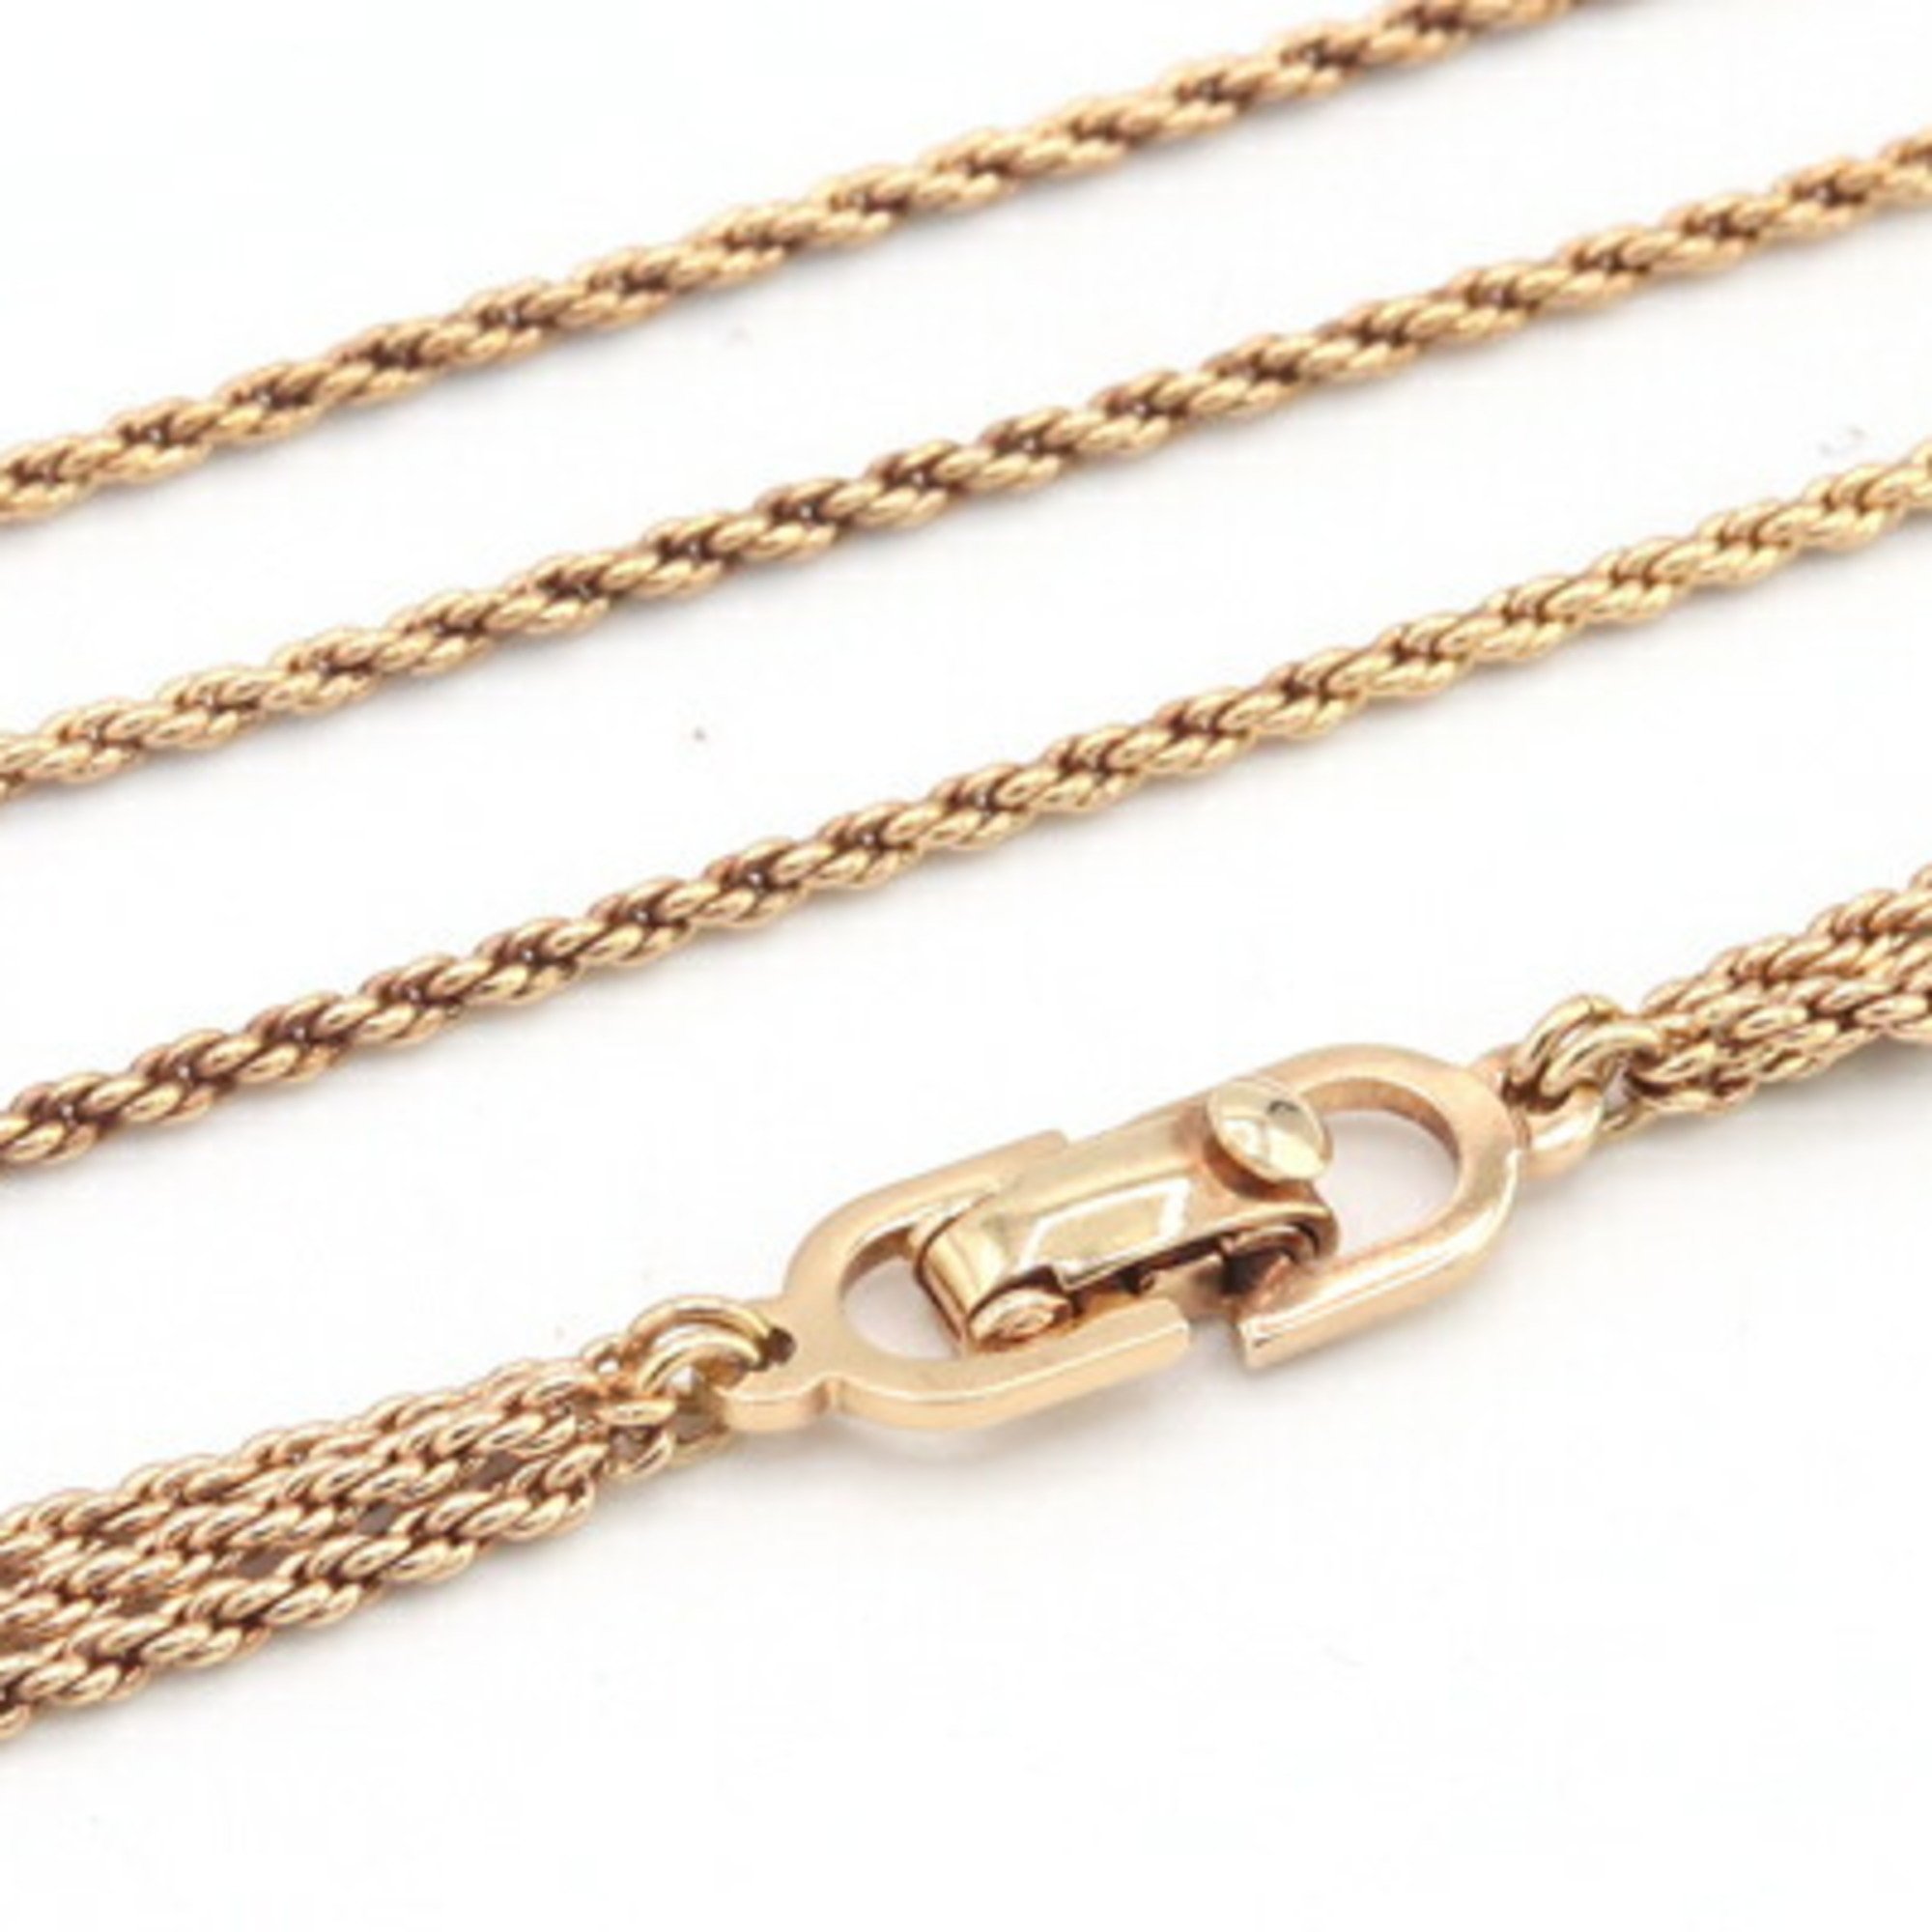 Christian Dior Dior Necklace Gold Metal Chain 3 Row Long Women's